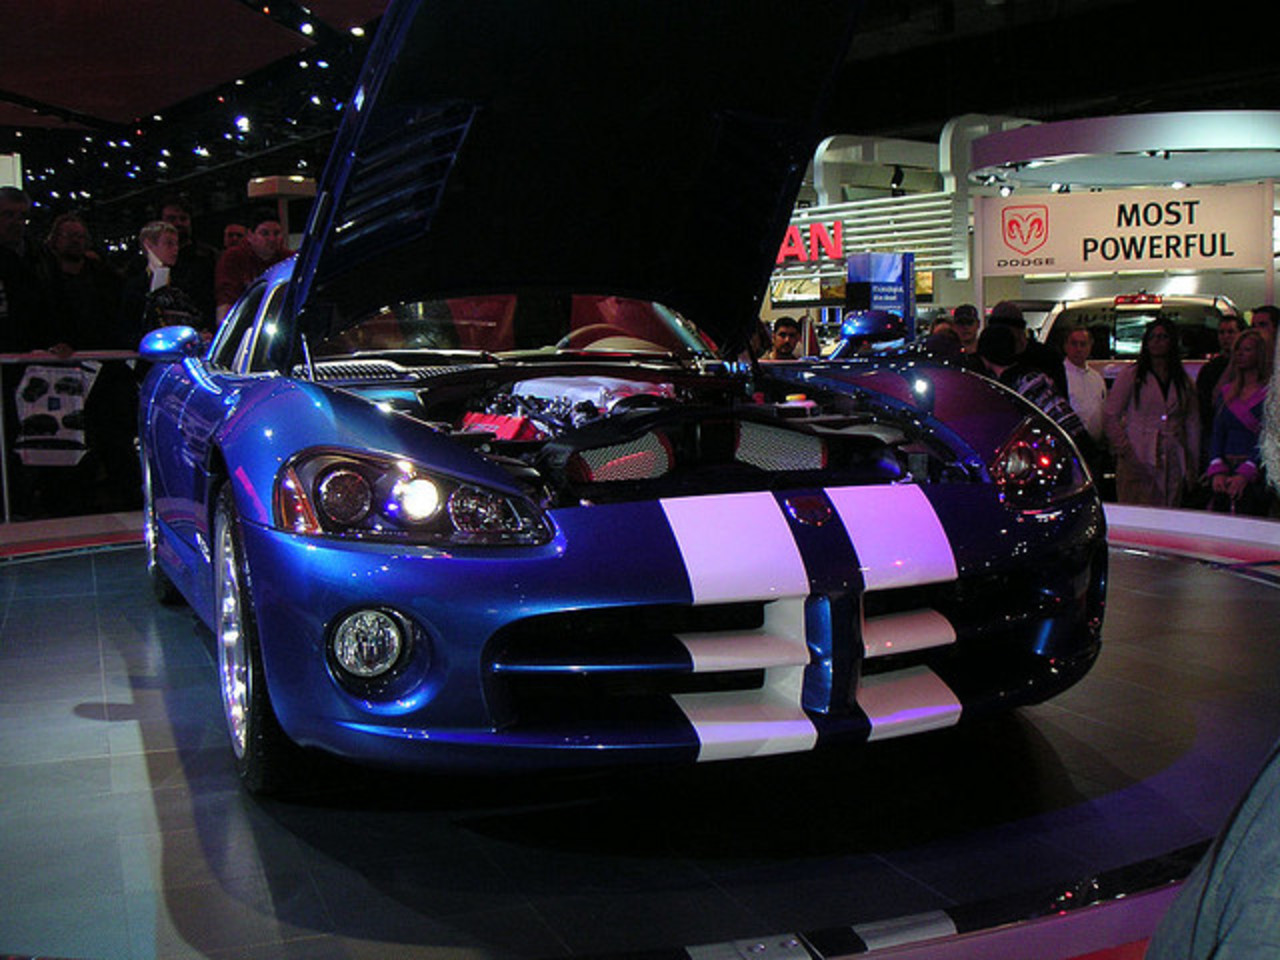 Dodge Viper Coupe | Flickr - Photo Sharing!